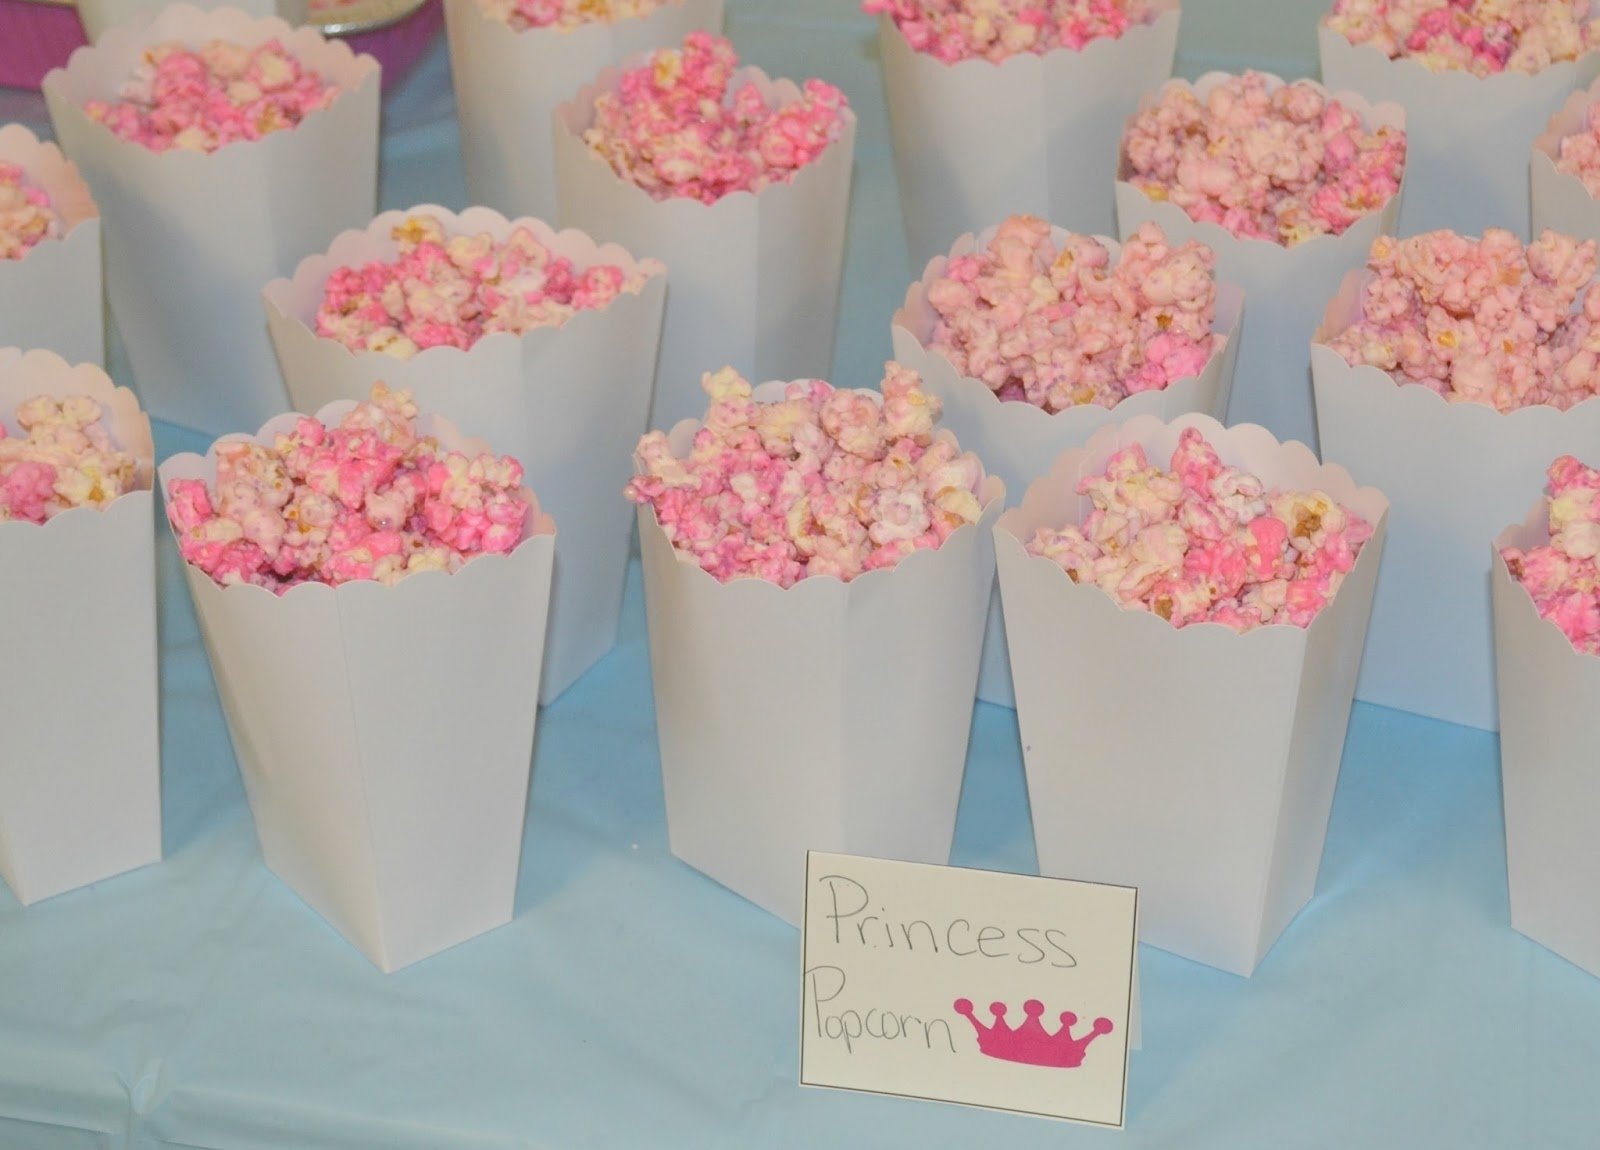 10 Stylish Ideas For A Princess Party enjoyable inspiration princess birthday party game ideas planning a 2022